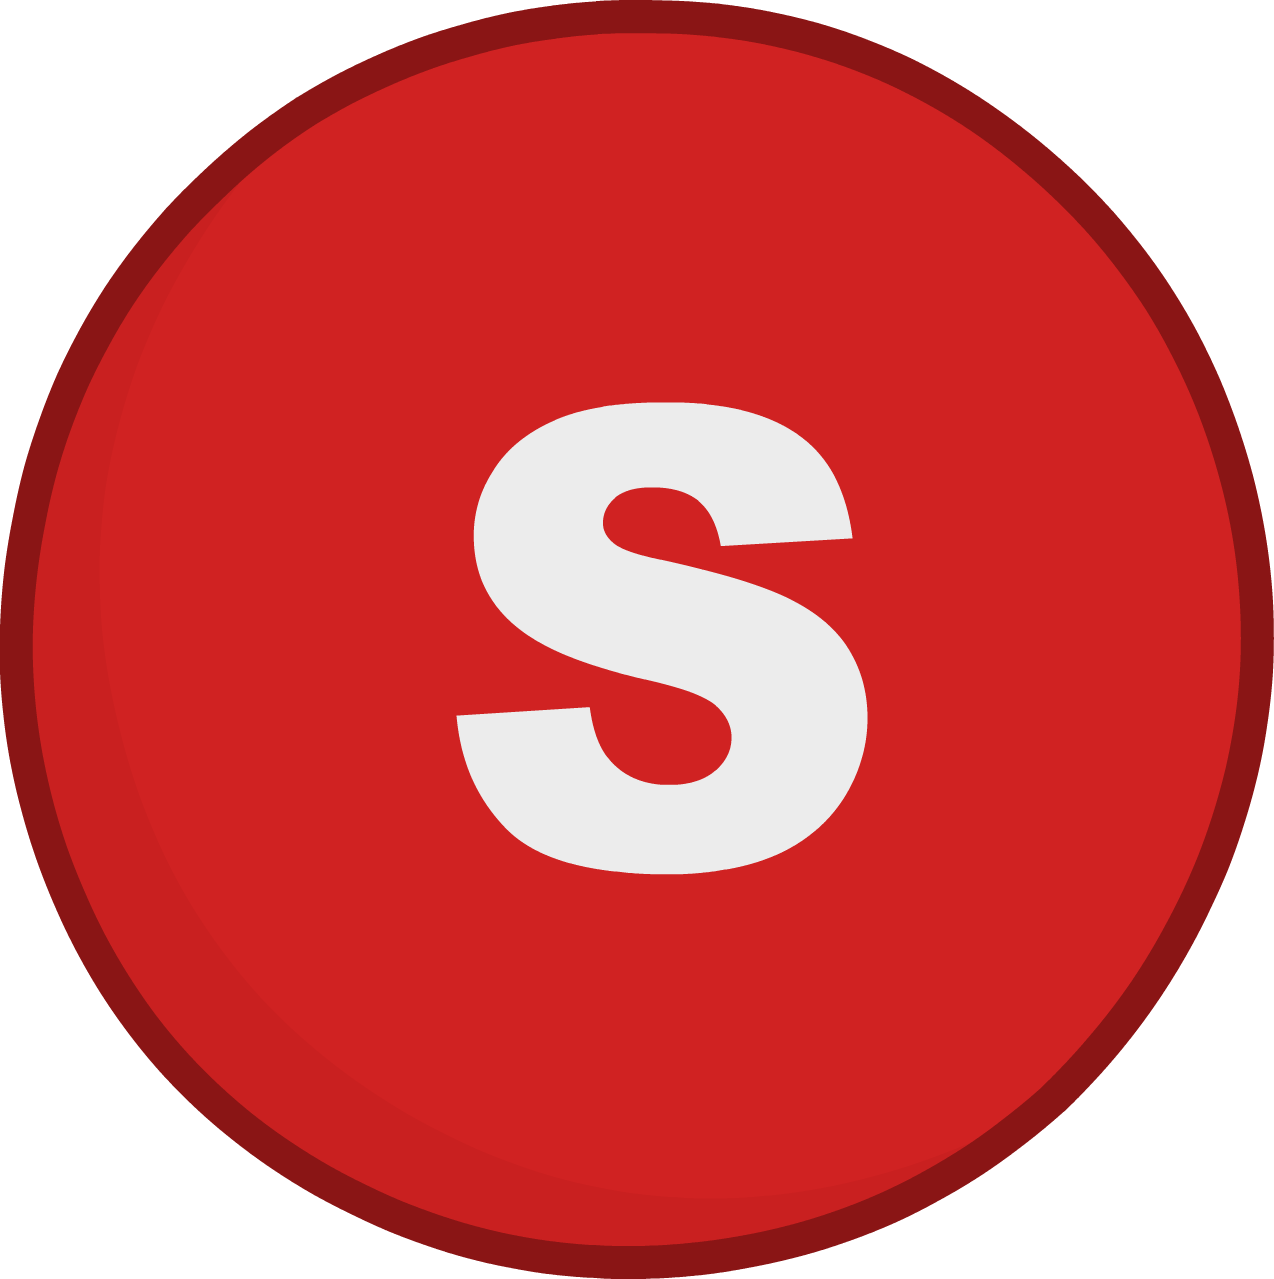 Skittle - Youtube Icon Png Circle (1274x1279)